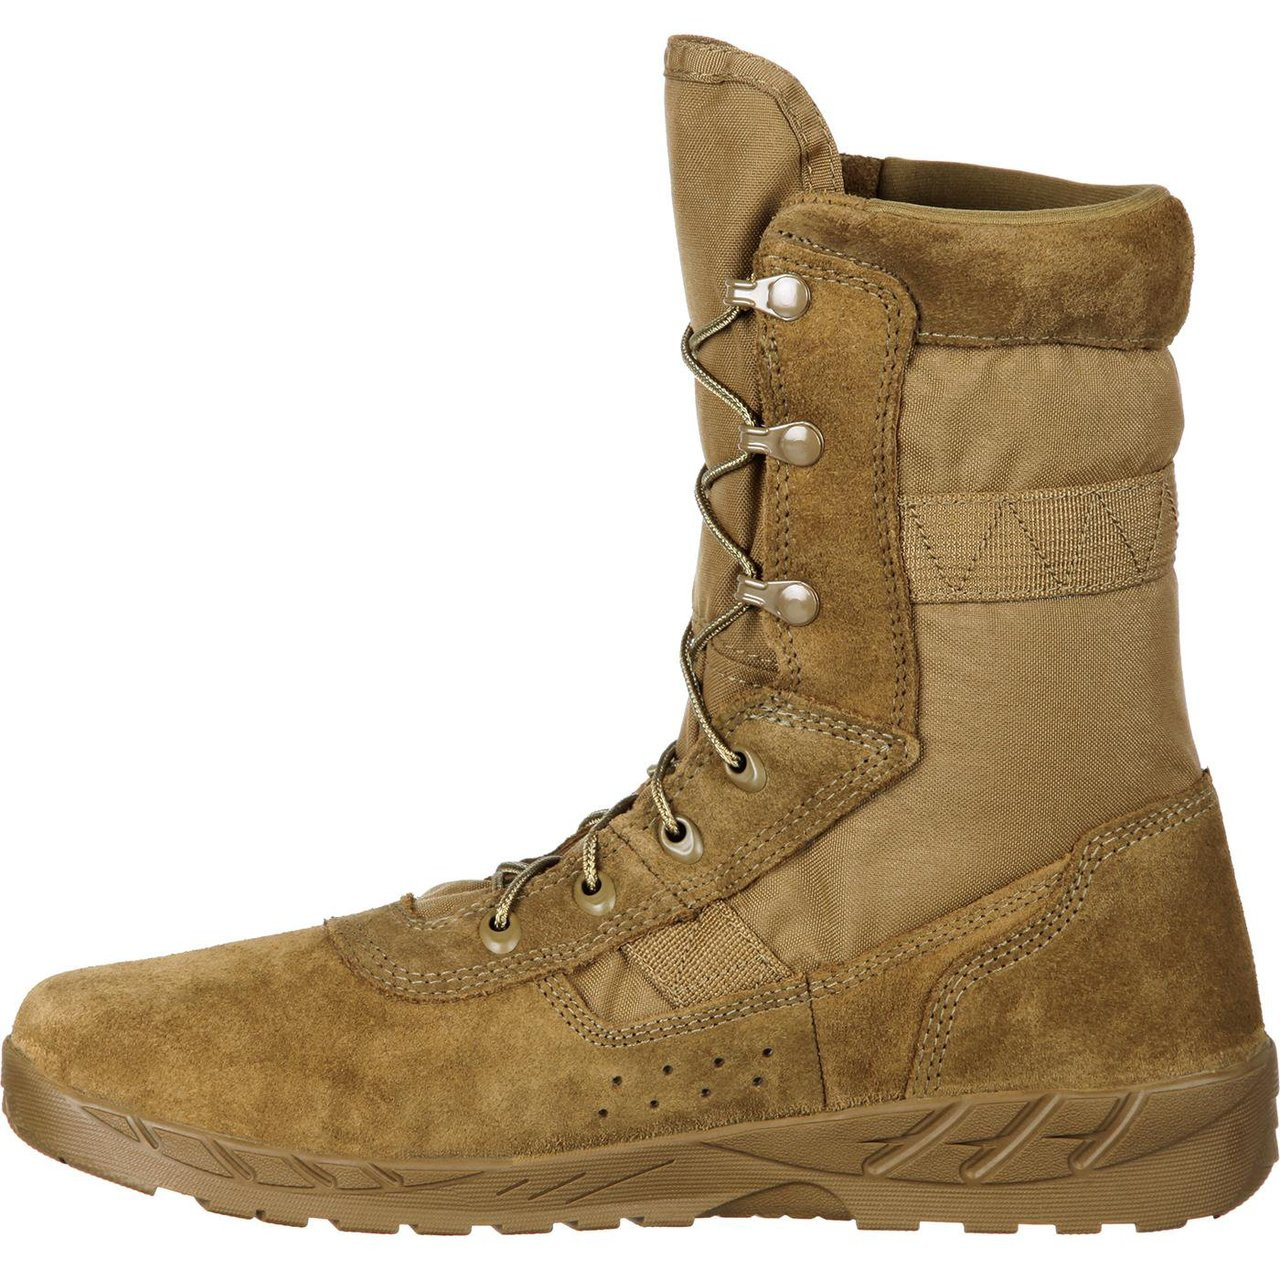 Rocky C7 CXT Lightweight Military Boot - Coyote | Kel-Lac